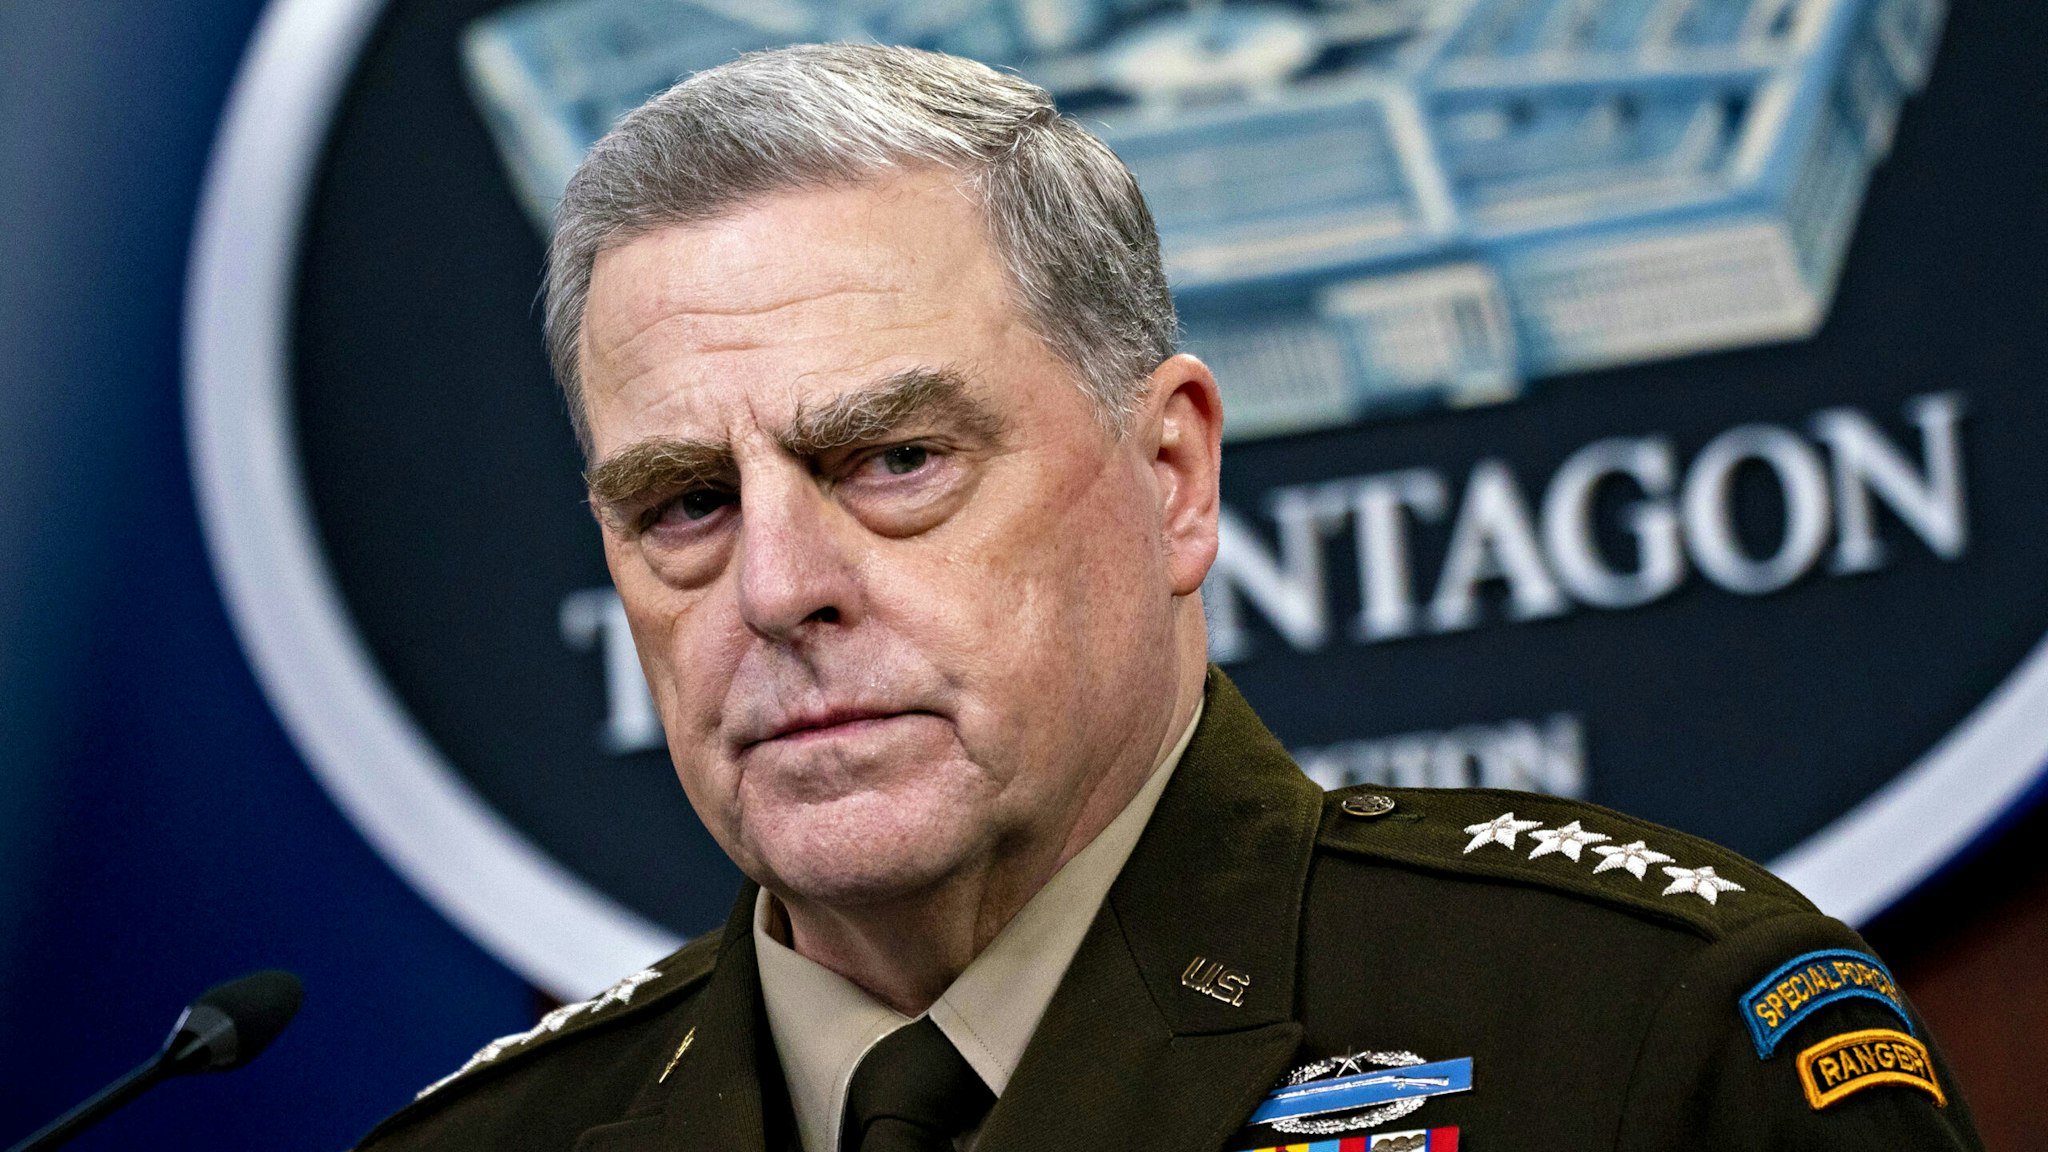 Mark Milley, chairman of the joint chiefs of staff, pauses while speaking during a news conference at the Pentagon in Arlington, Virginia, U.S., on Wednesday, Sept. 1, 2021. President Biden yesterday declared an end to two decades of U.S. military operations in Afghanistan, offering an impassioned defense of his withdrawal and rejecting criticism that it was mishandled.